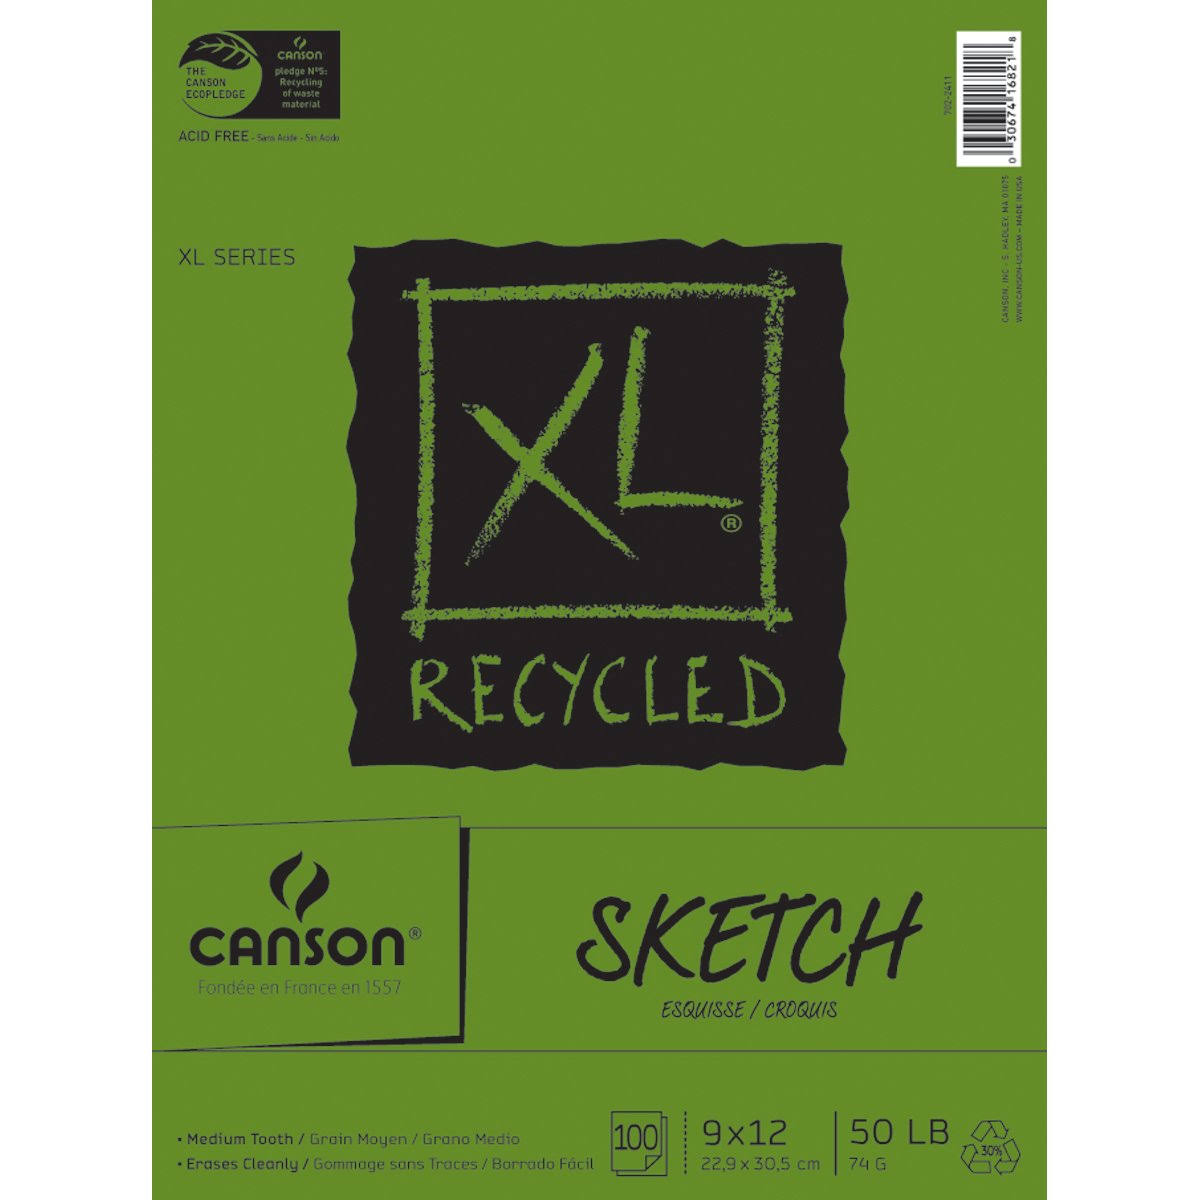 Canson XL Recycled Sketch Fold Over Bound Pad - 9x12"